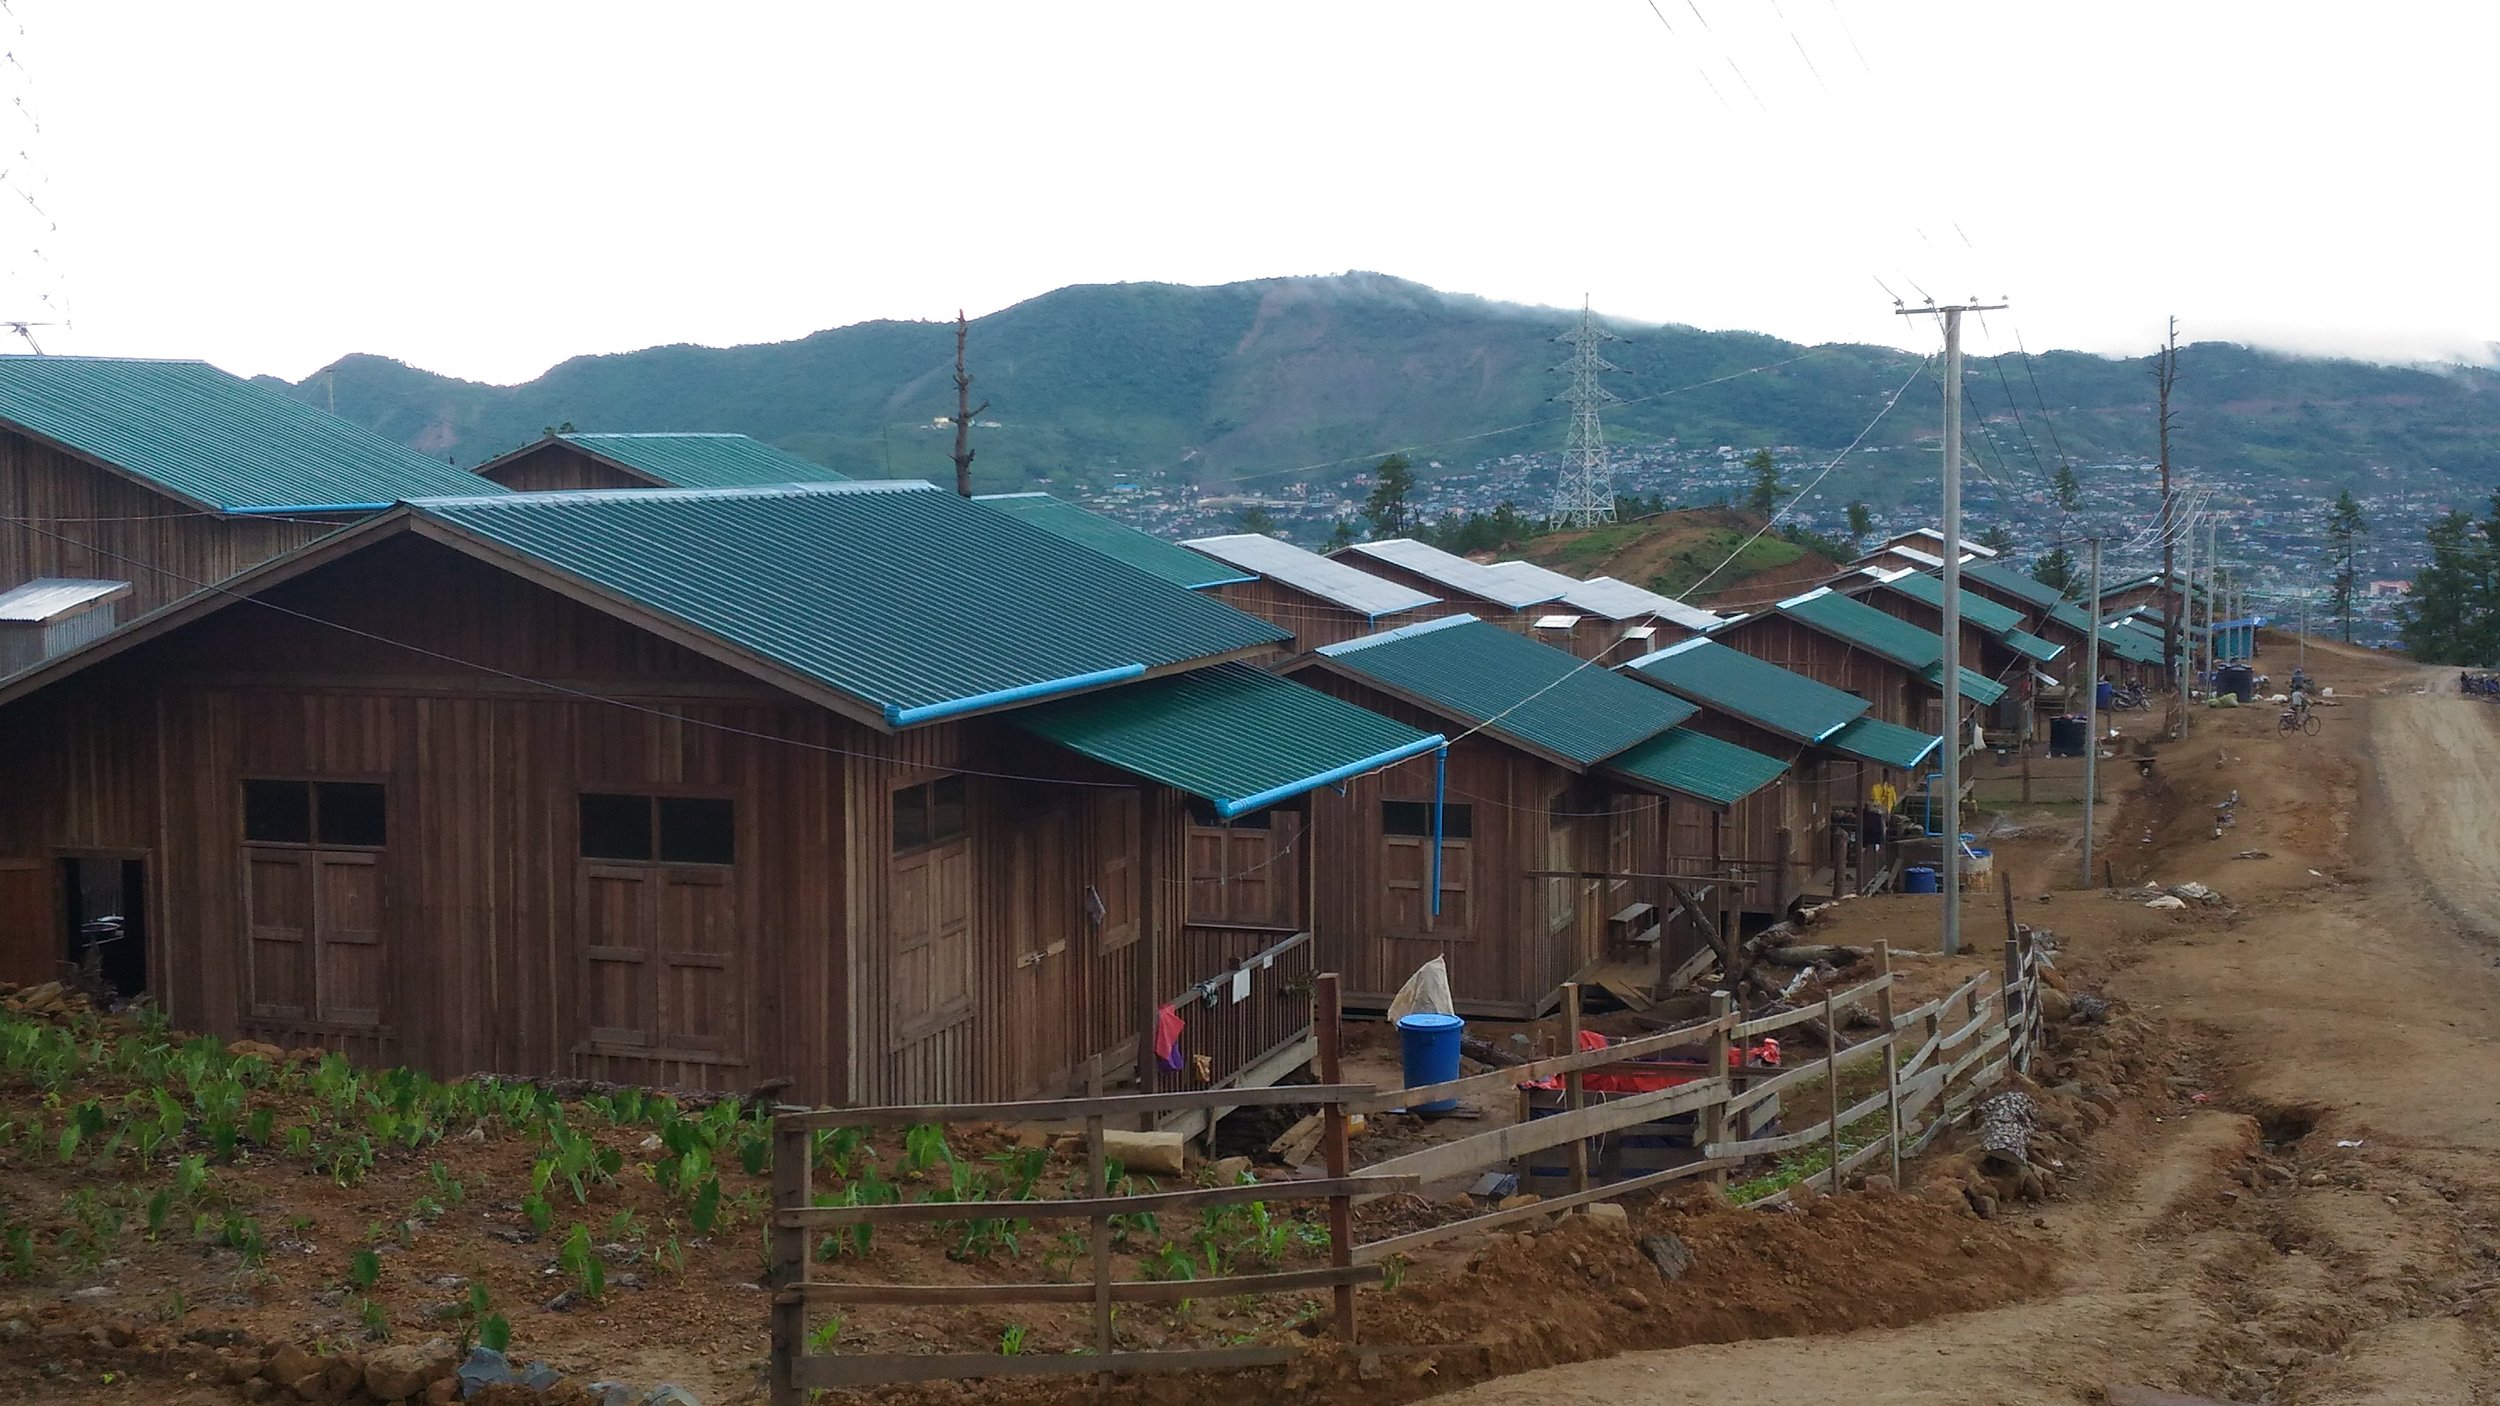 The “new town” resettlement area, where hundreds of families have been relocated. Houses are under construction, but questions remain over future livelihoods 